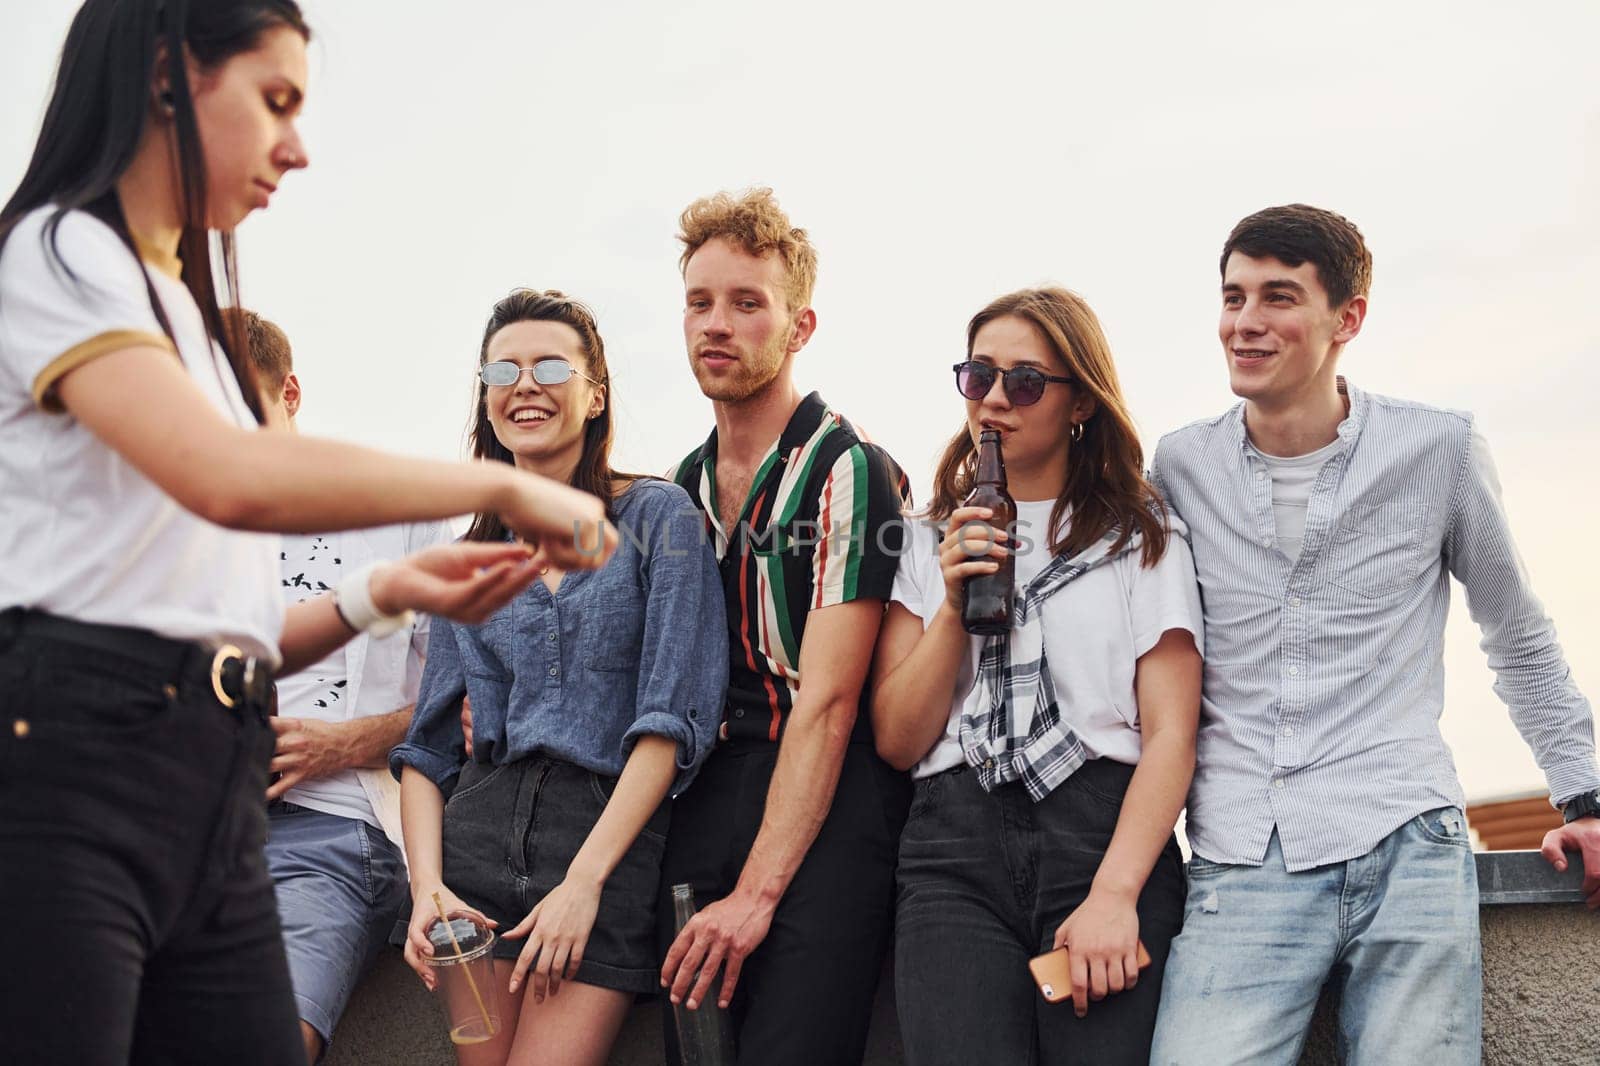 Standing with phones and alcohol in hands. Group of young people in casual clothes have a party at rooftop together at daytime.